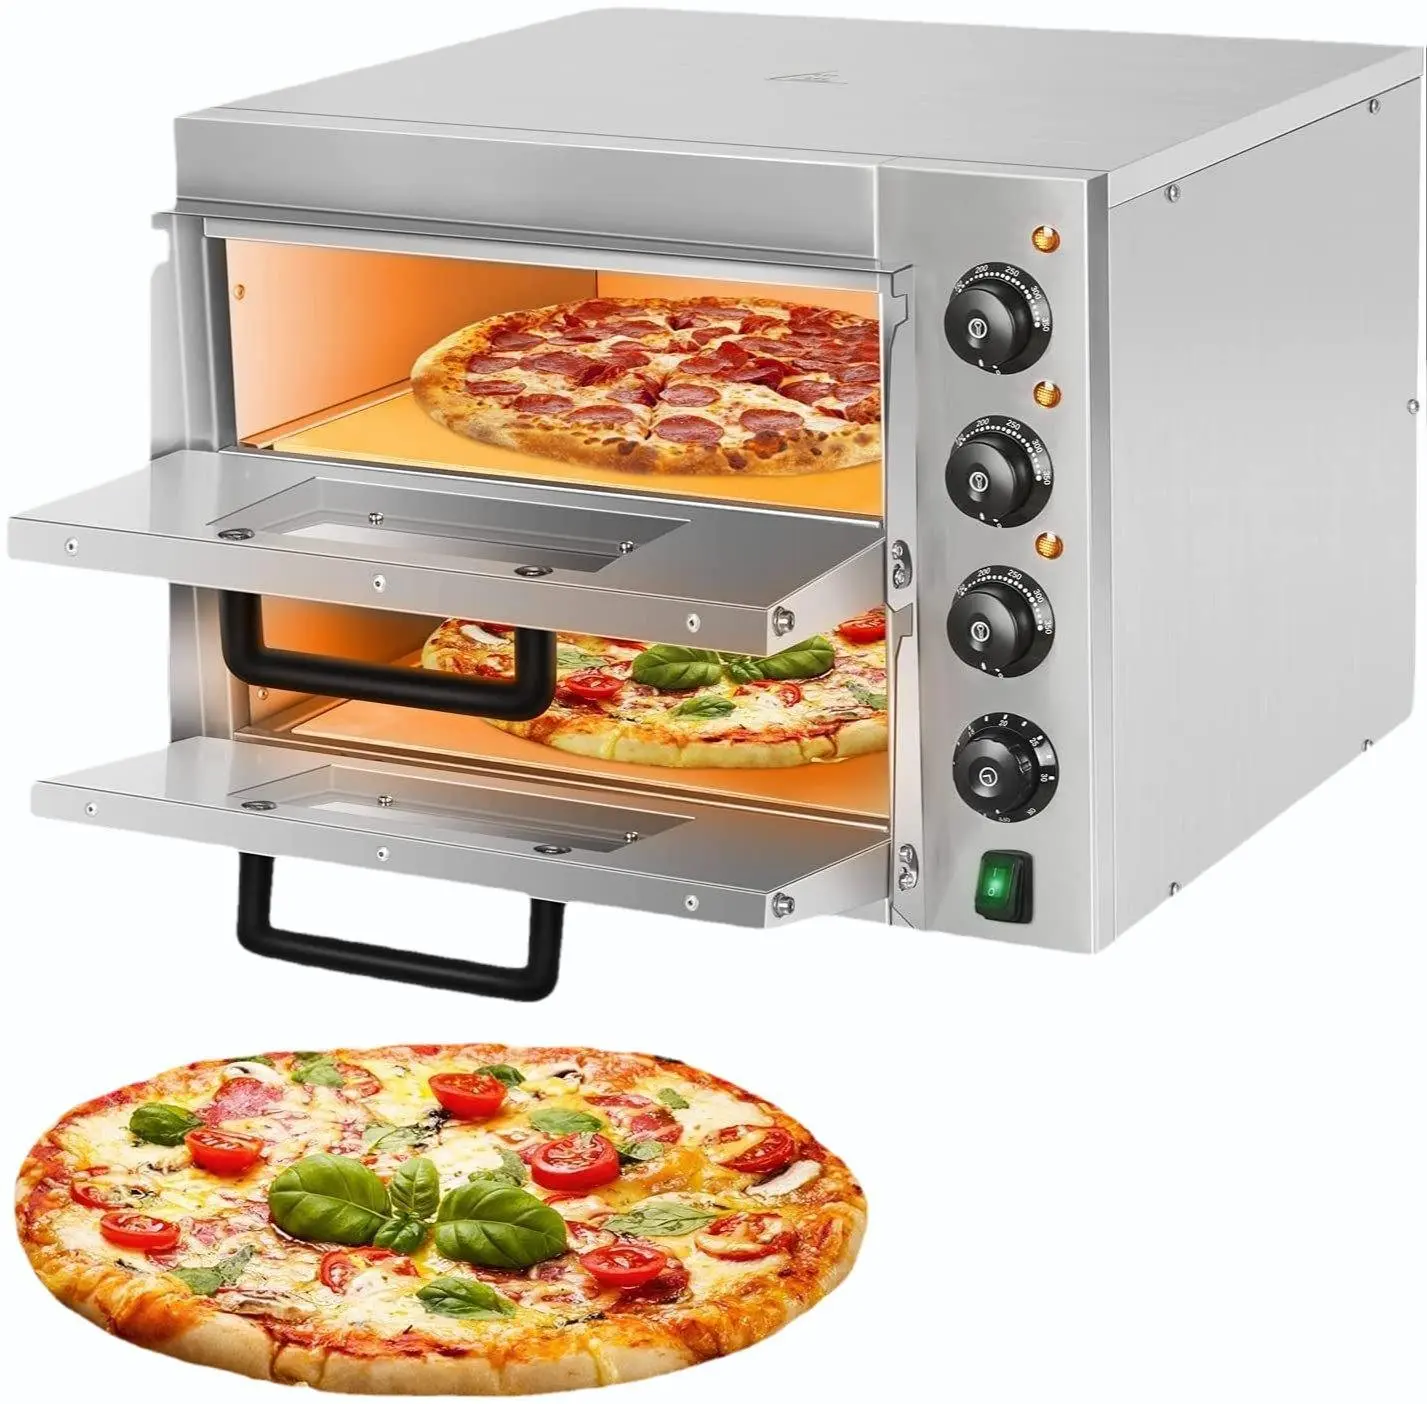 What Size Pizza Oven Do I Need? A Guide to Choosing the Right Pizza Oven Size